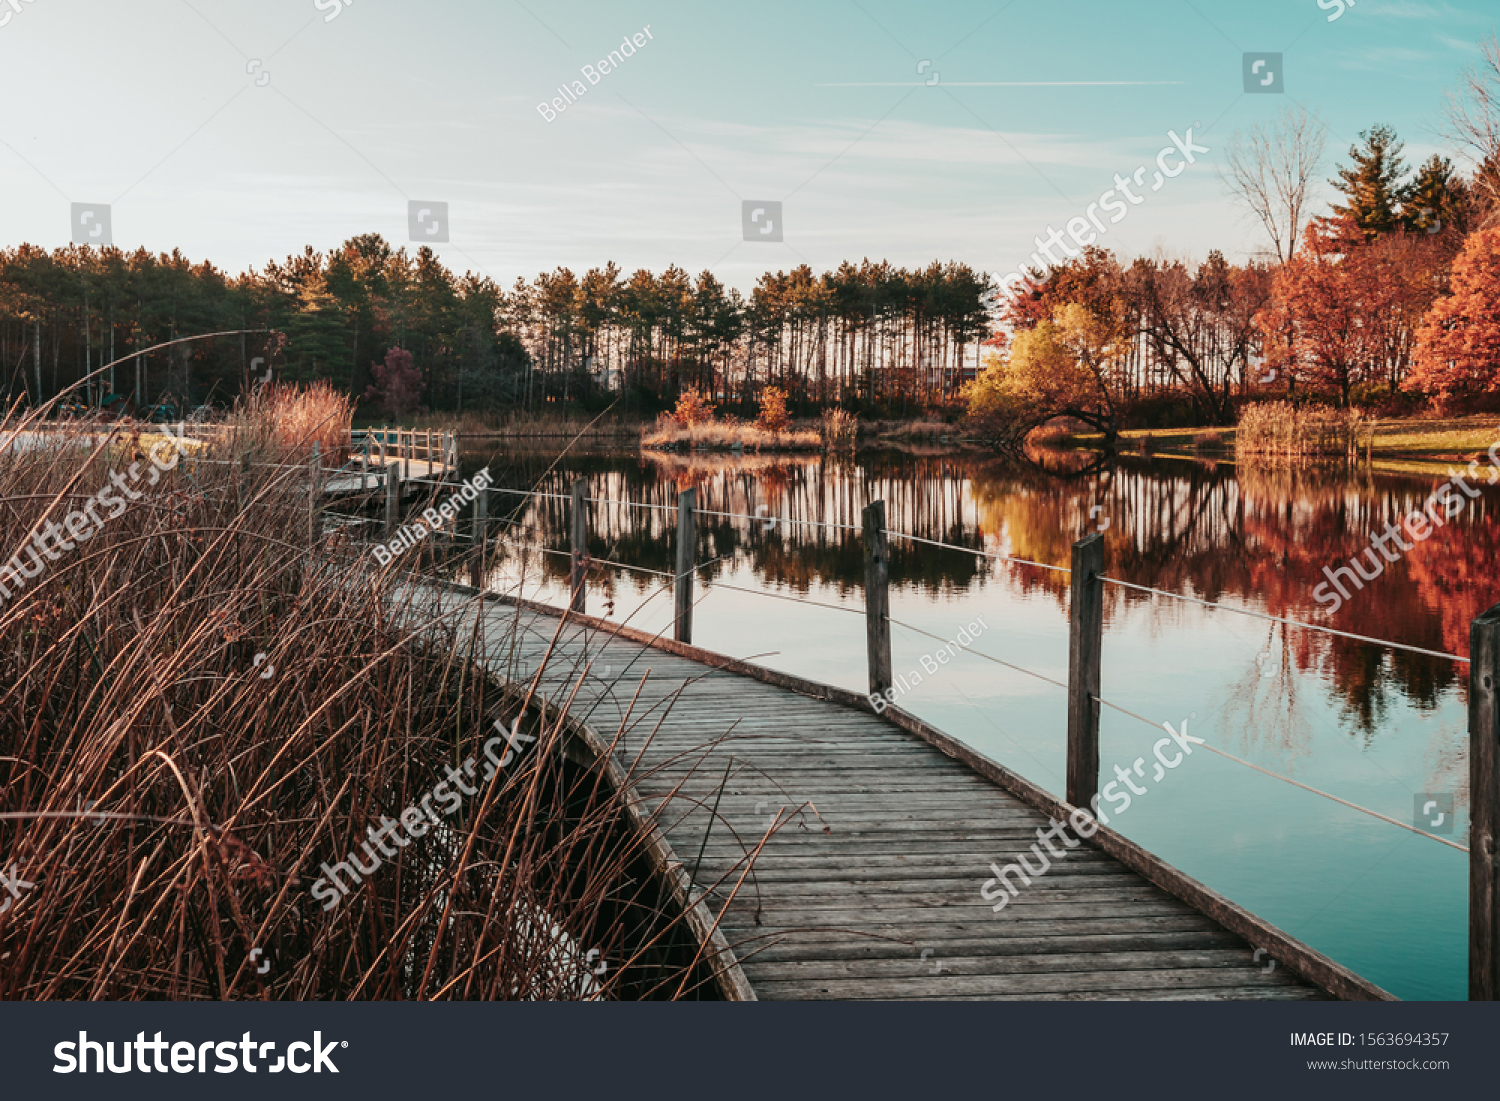 A wooden boardwalk alongside gorgeous pond reflections as the morning sun rises from behind the pines. A beautiful autumn landscape at Jester Park, Iowa, USA. #1563694357